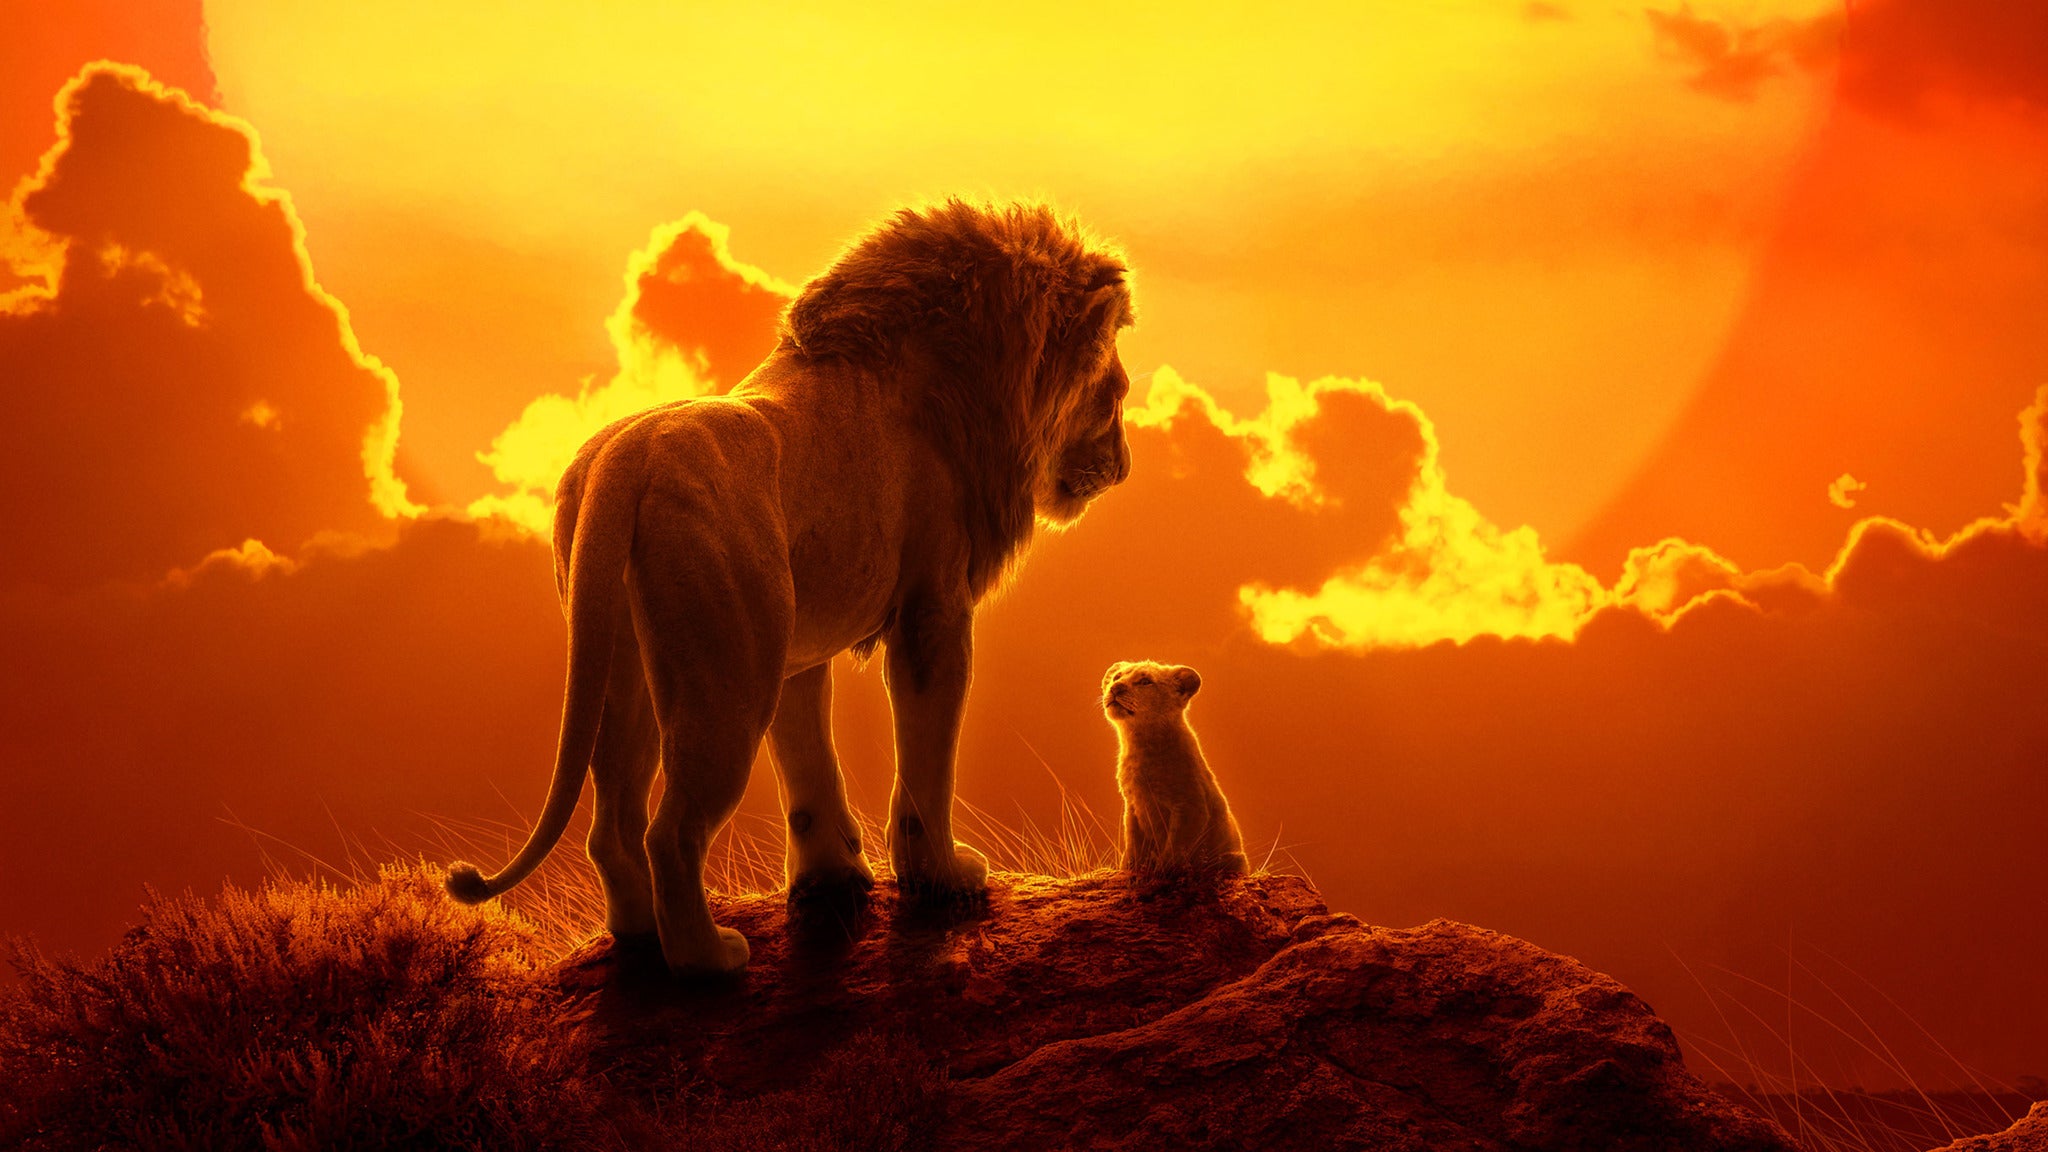 download lion king musical ticketmaster